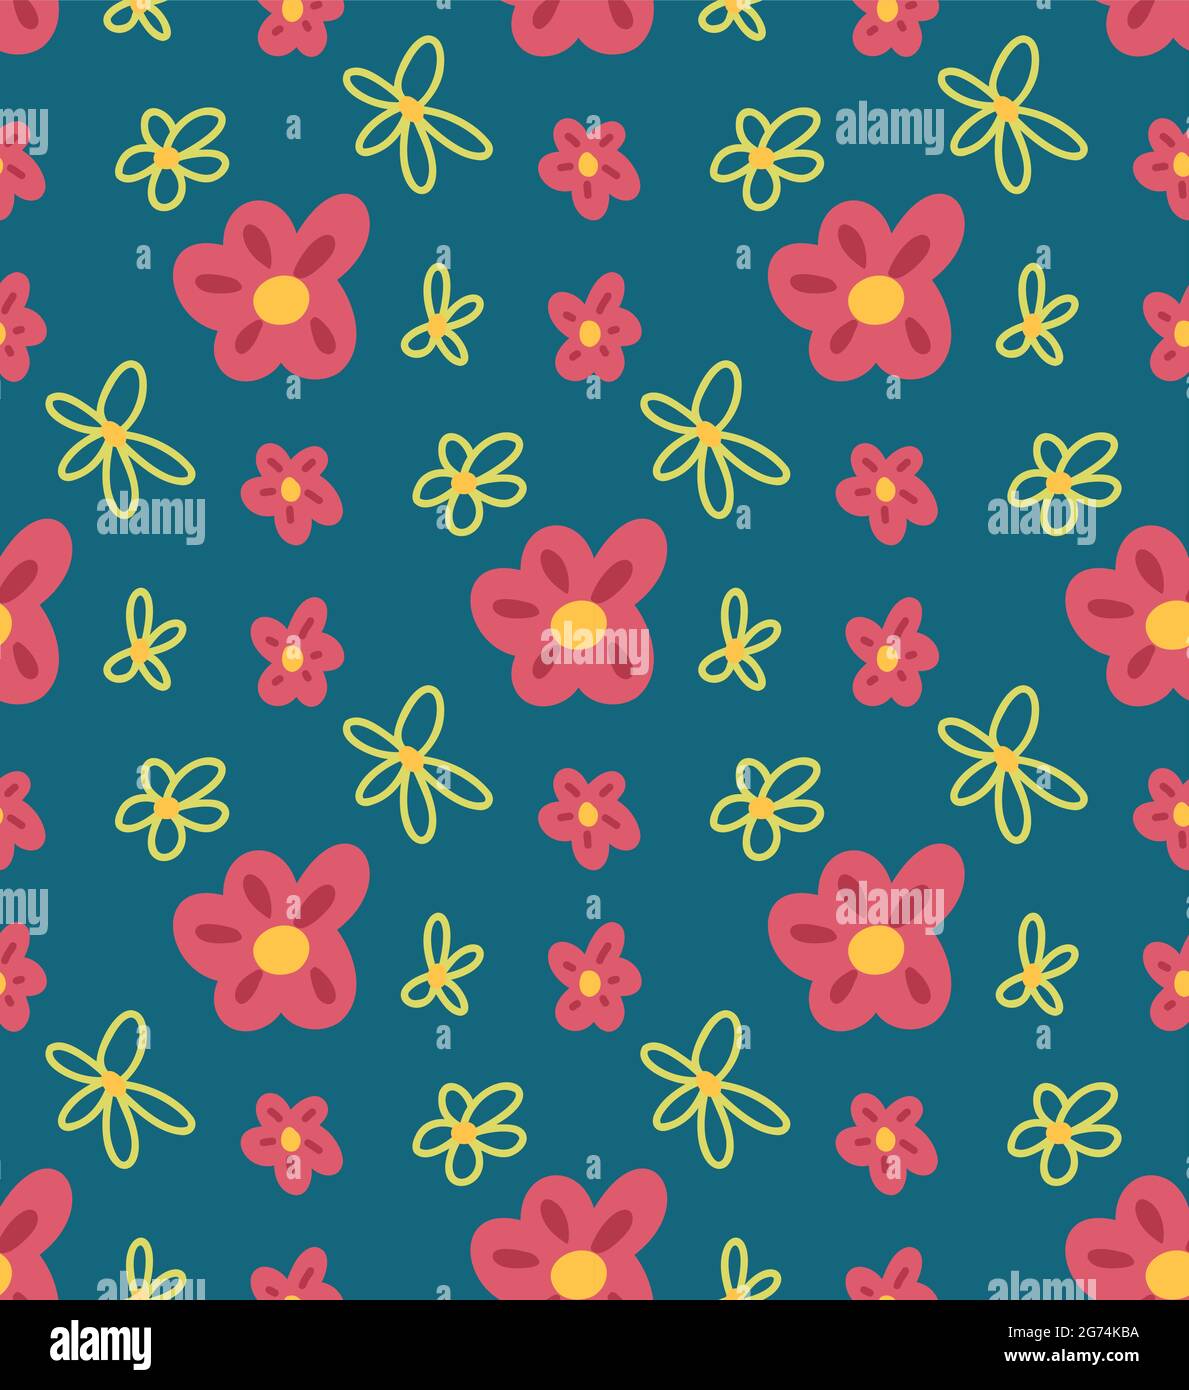 Simplicity childish pattern with pink flowers on blue background. Vector natural flat texture with outline daisies. Fabric with flora in pastel colors Stock Vector